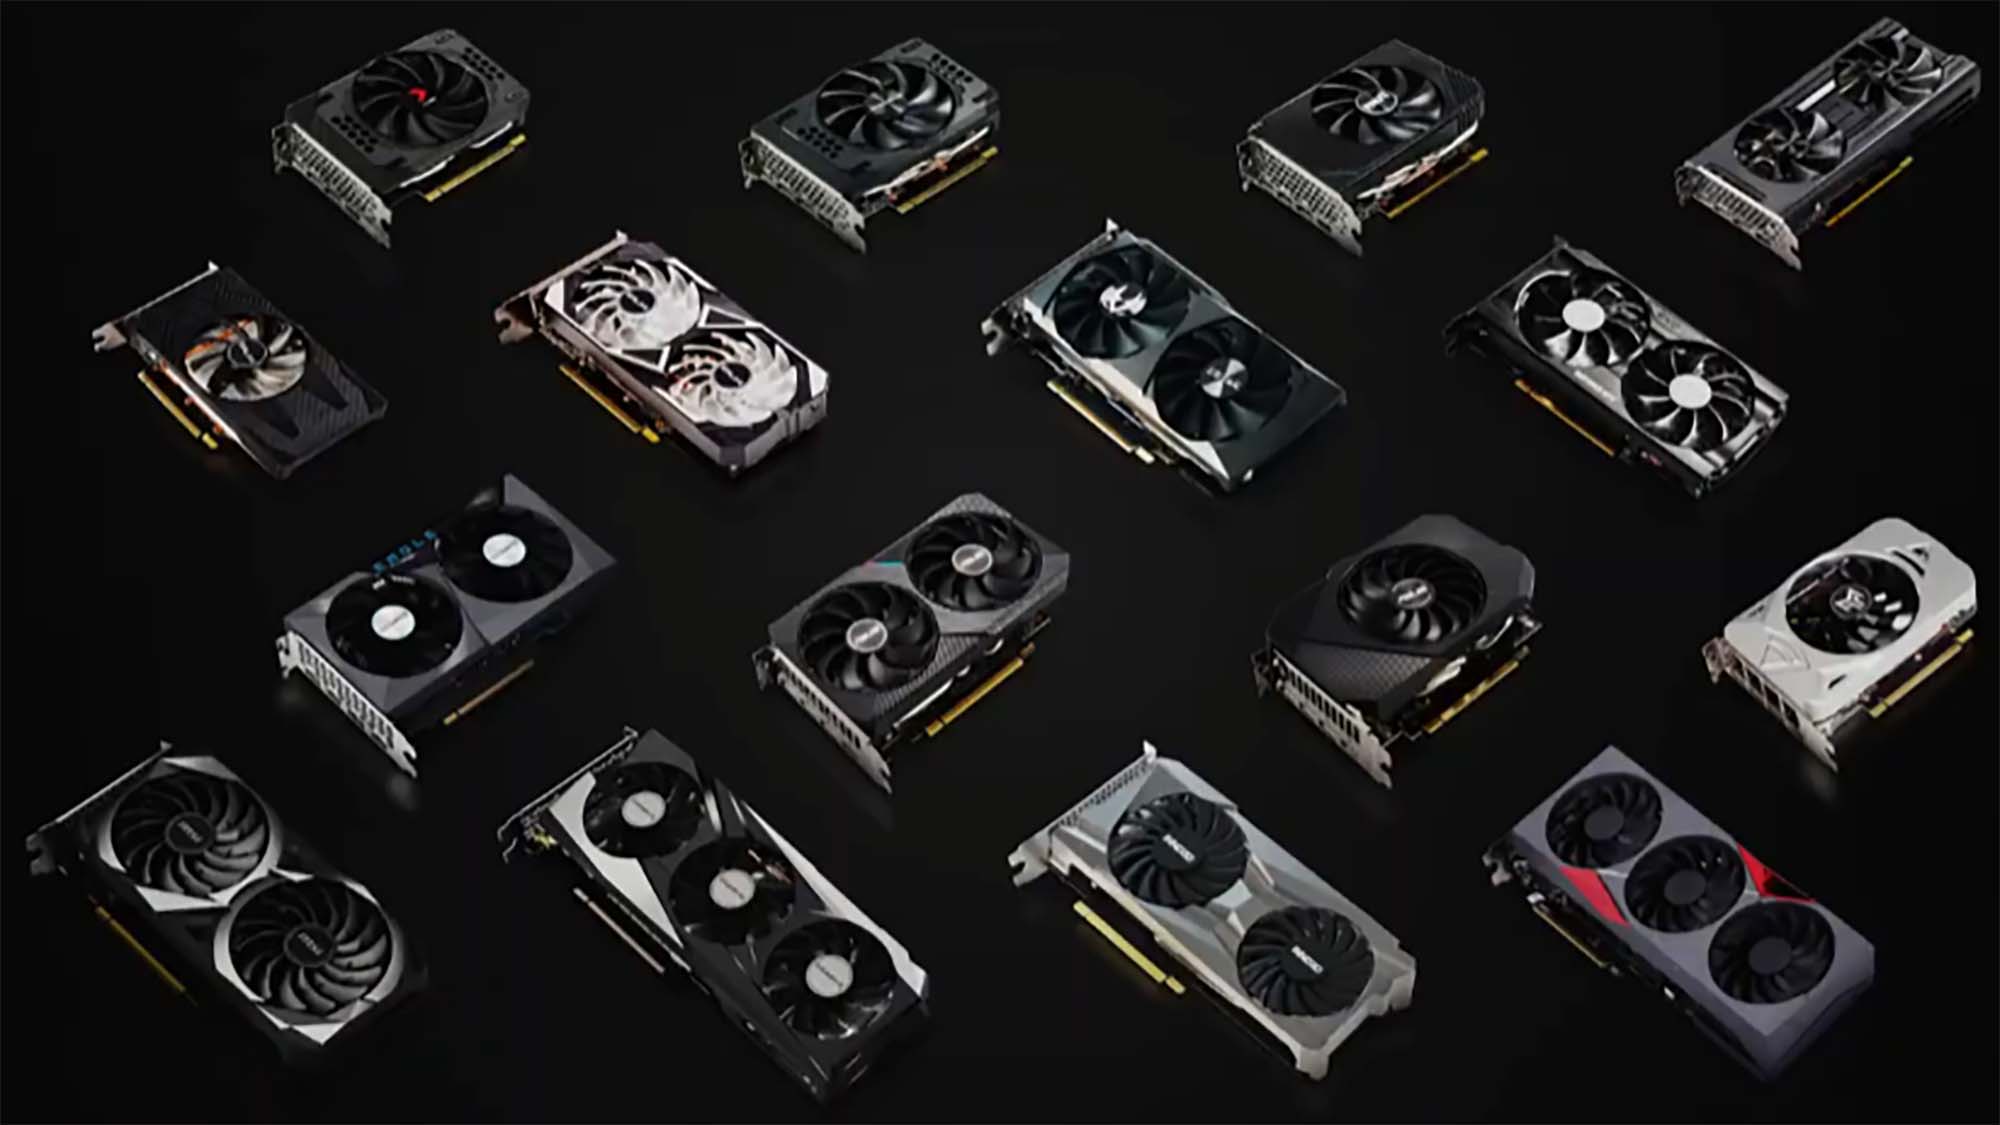 A few dozen RTX 3050 graphics cards spaced out and arranged against a black background